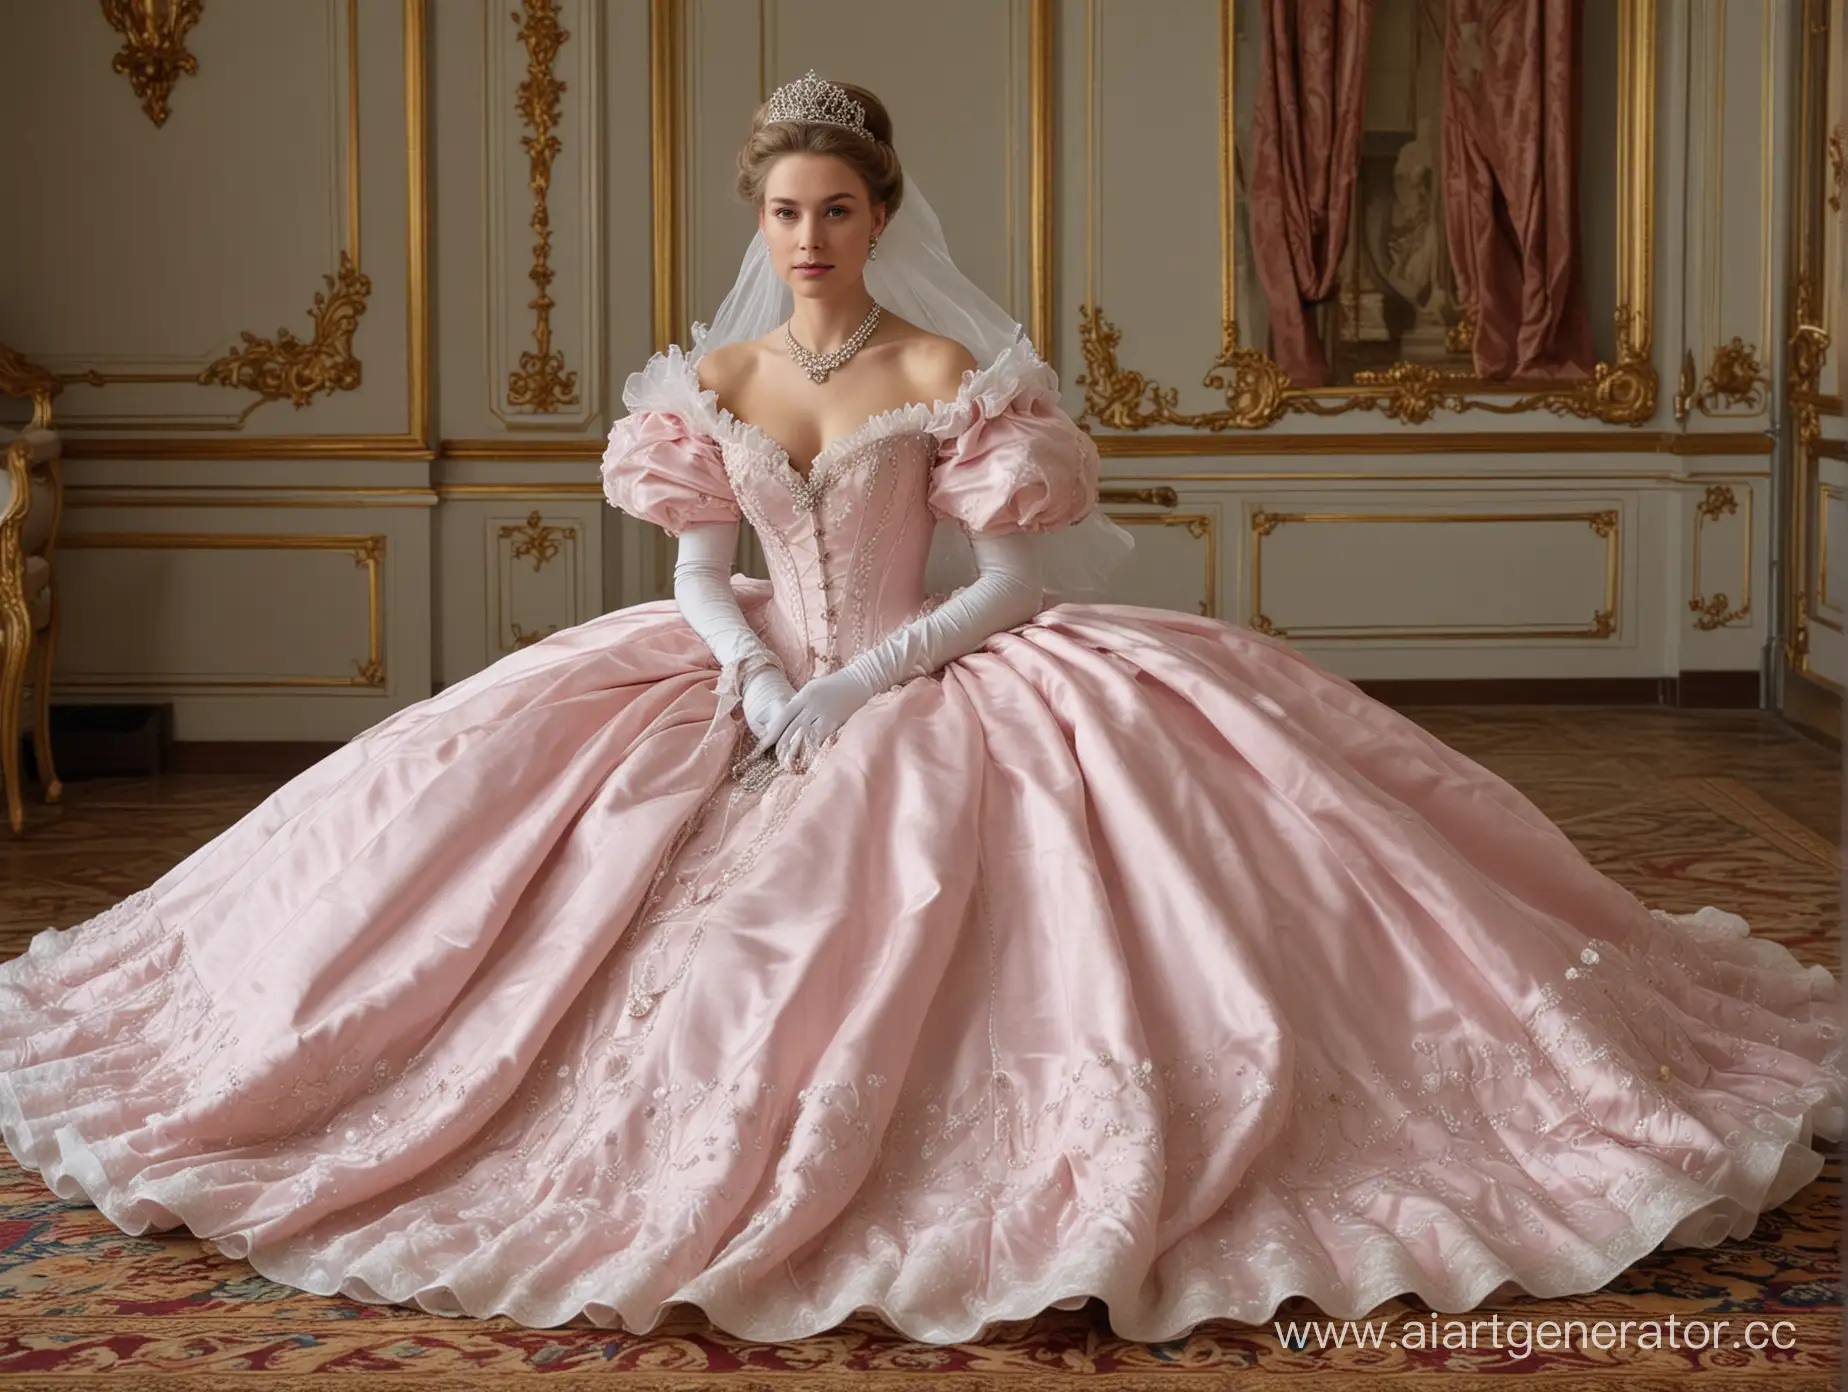 Regal-Queen-in-Rococo-Dress-Sitting-in-Palace